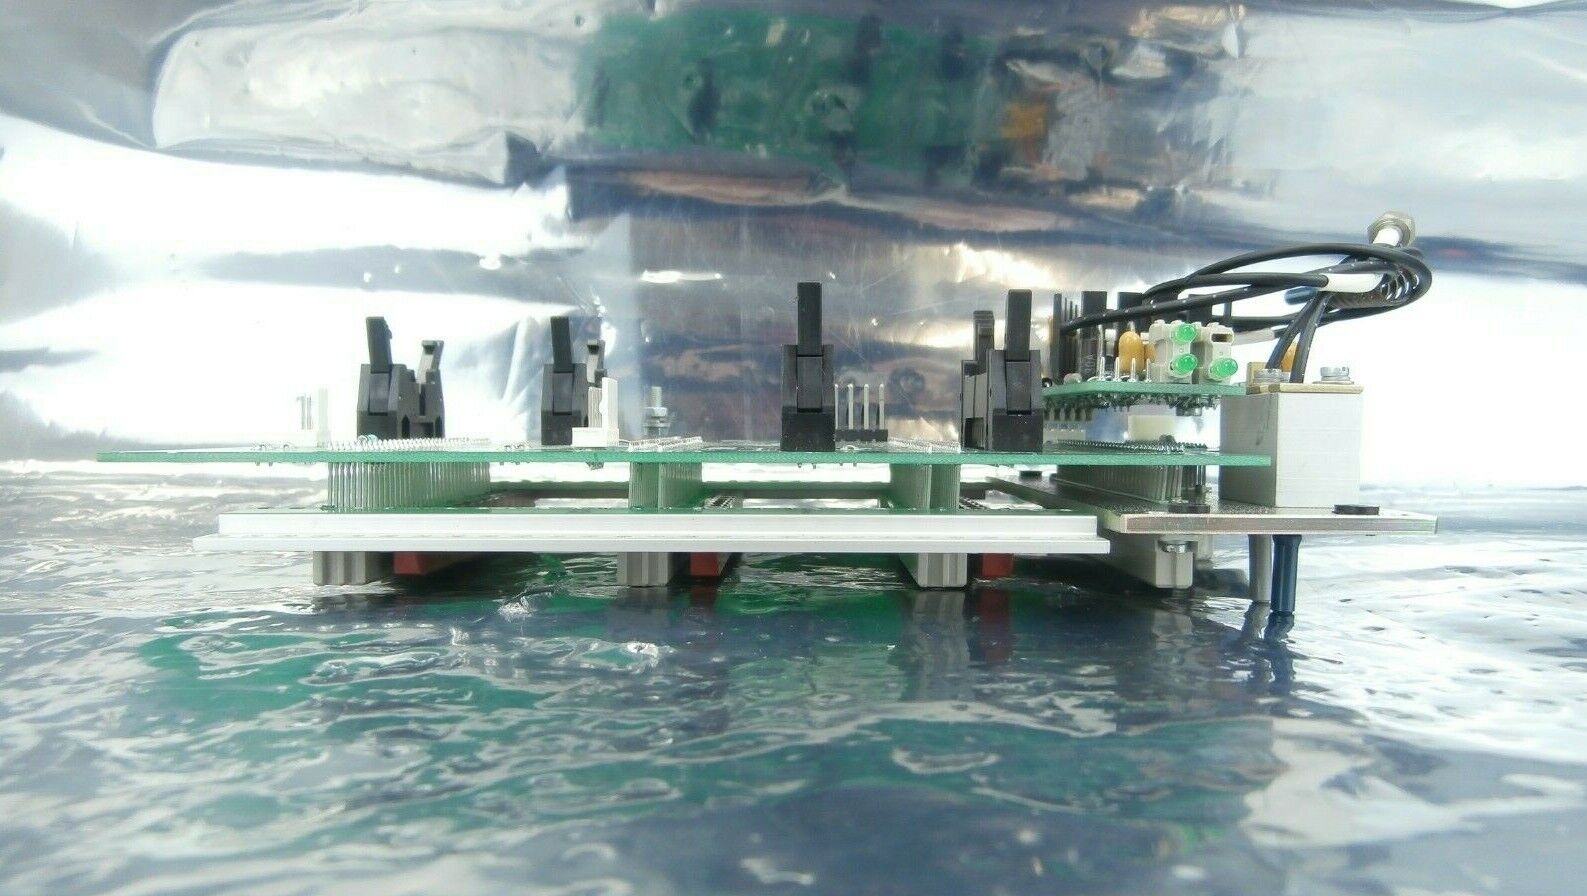 AMAT Applied Materials 0100-90851 H.V/A.MAG Motherboard PCB 0100-90015 Issue E